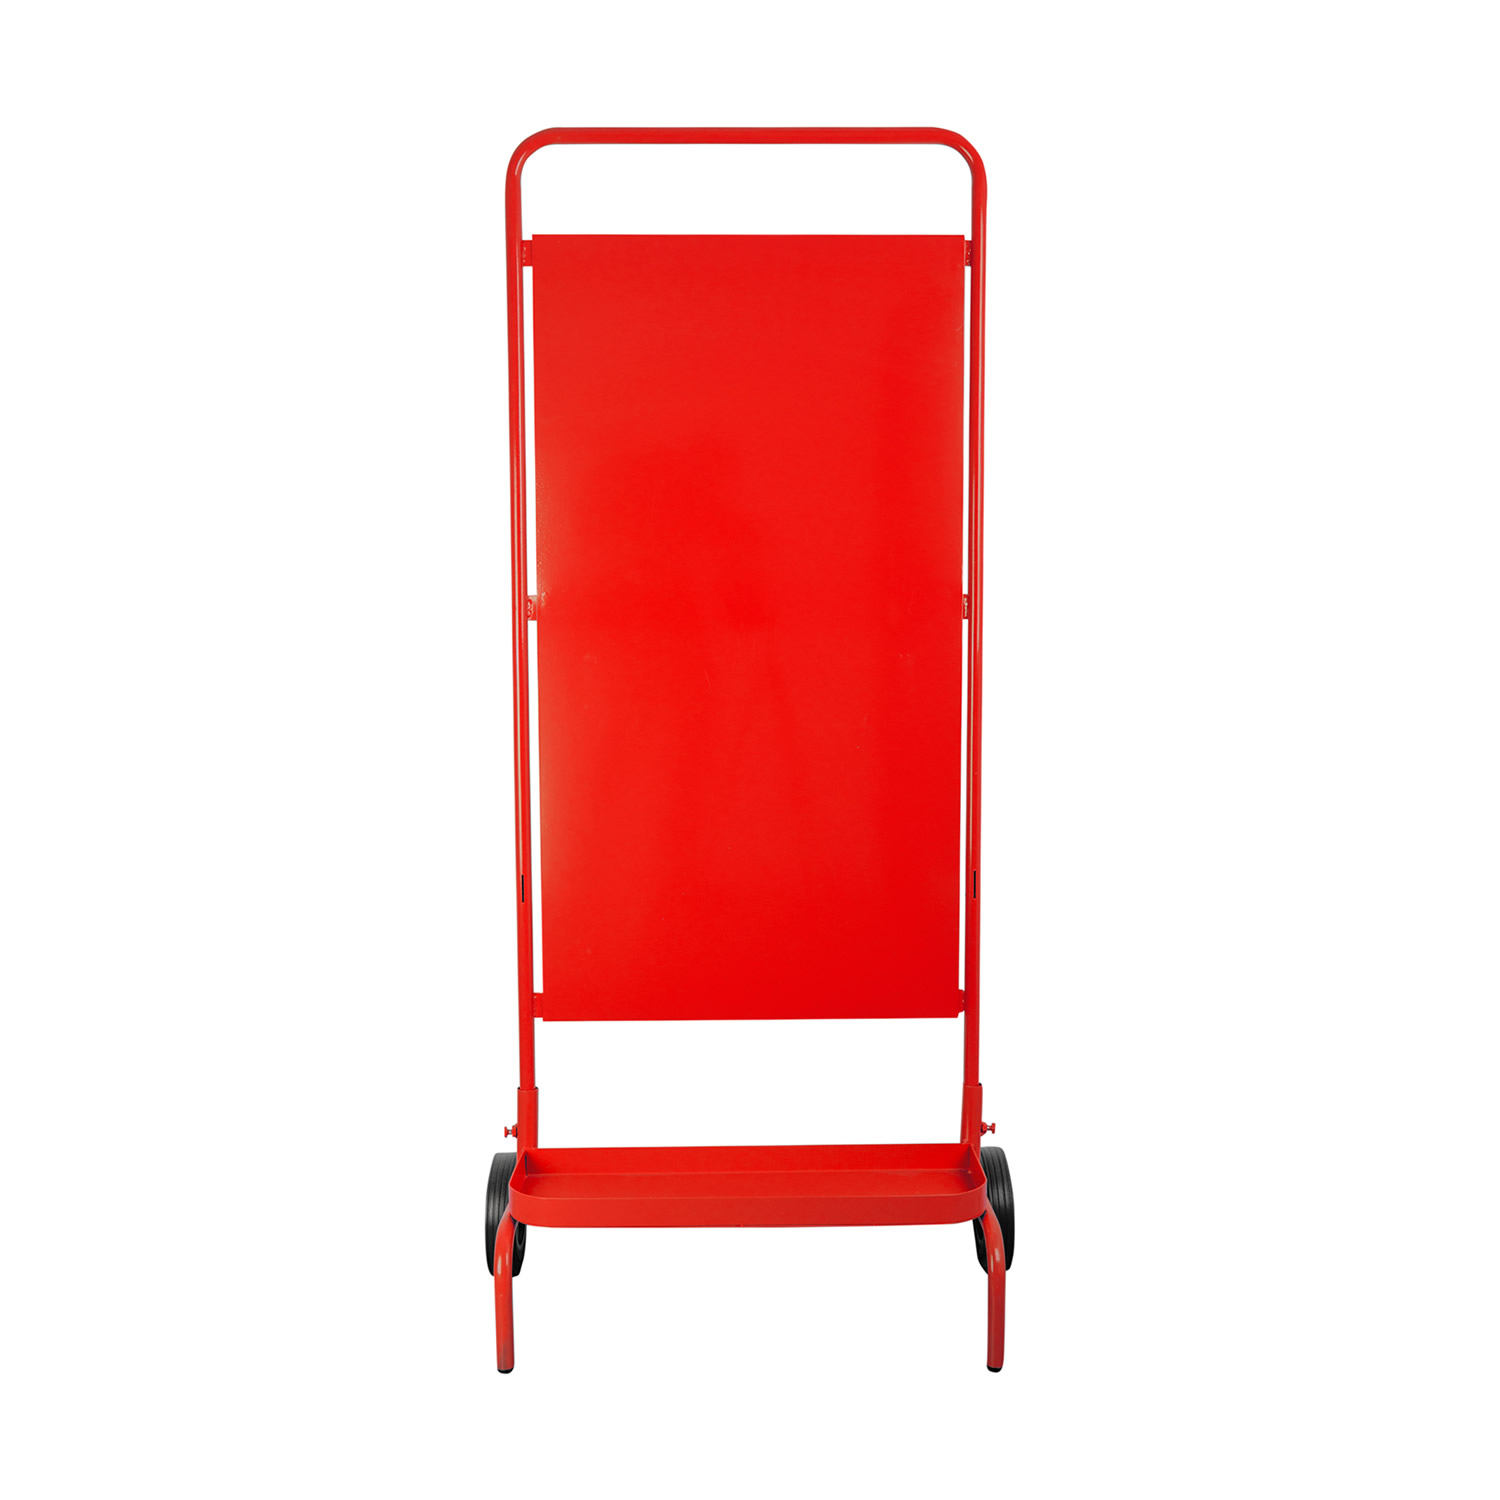 UltraFire Red Fire Extinguisher Site Stand